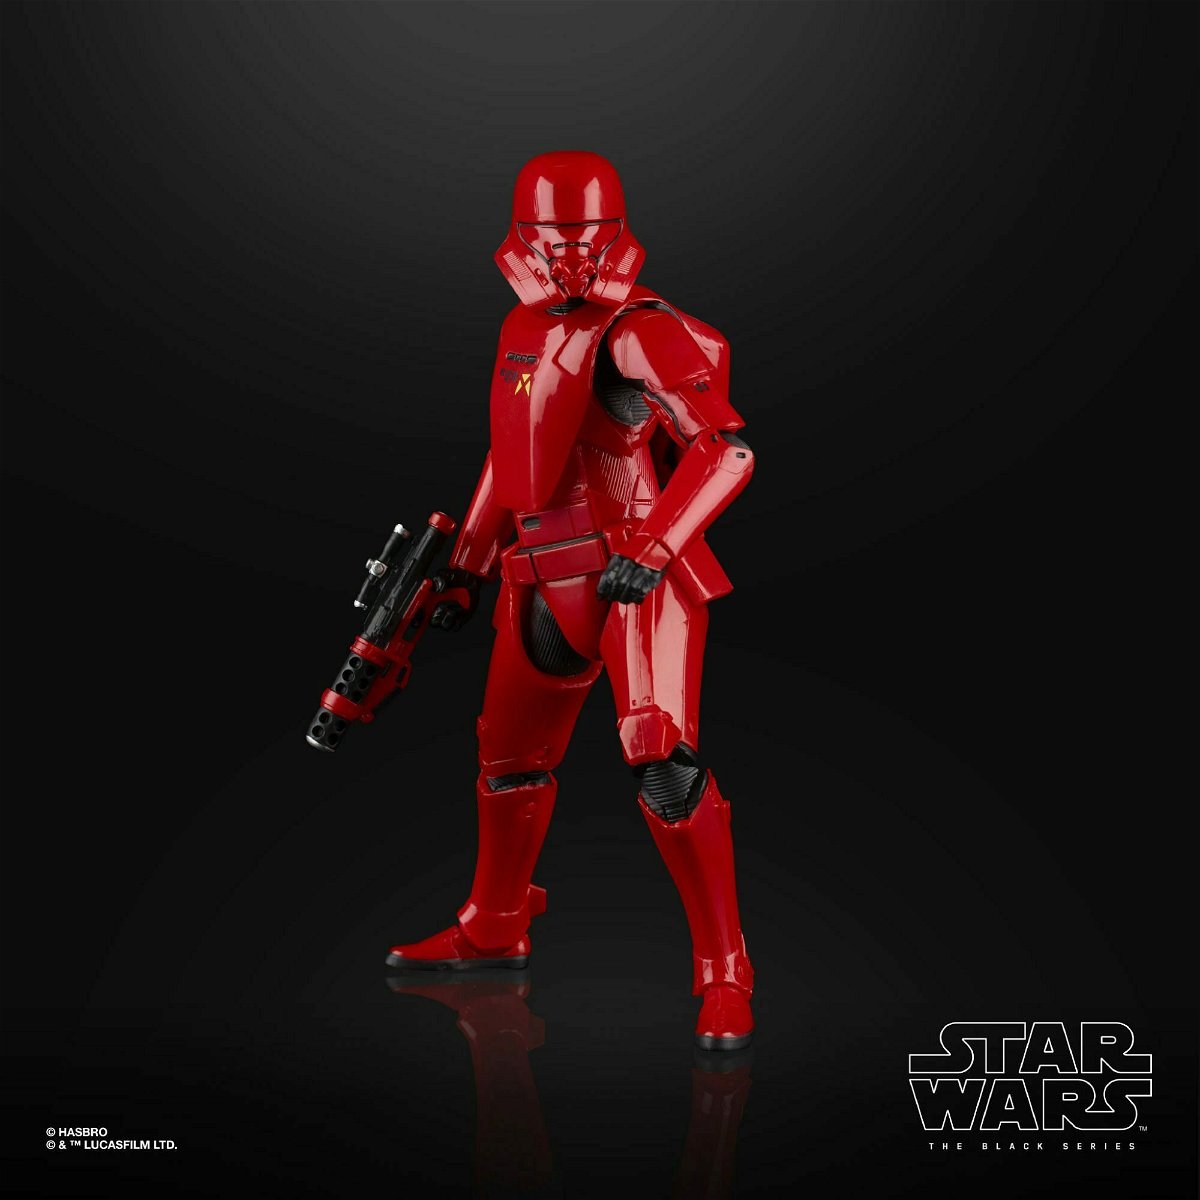 L'action figure Star Wars The Black Series Sith Trooper